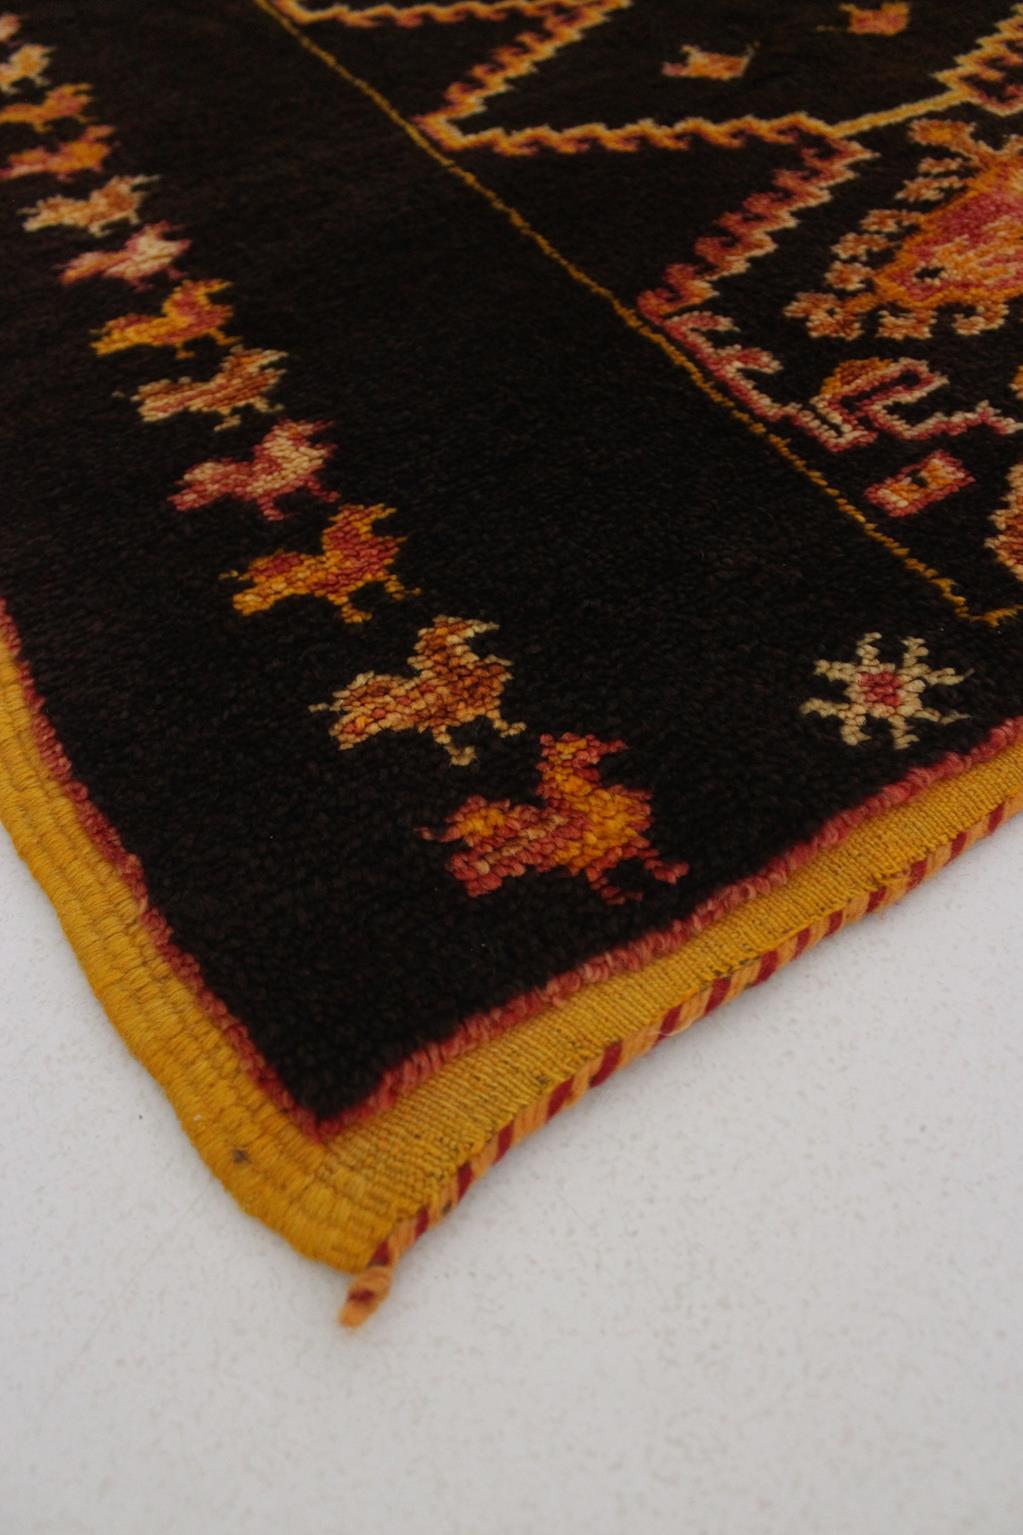 Hand-Woven Vintage Moroccan Taznakht rug - Black/yellow - 3.3x6.4feet / 100x195cm For Sale